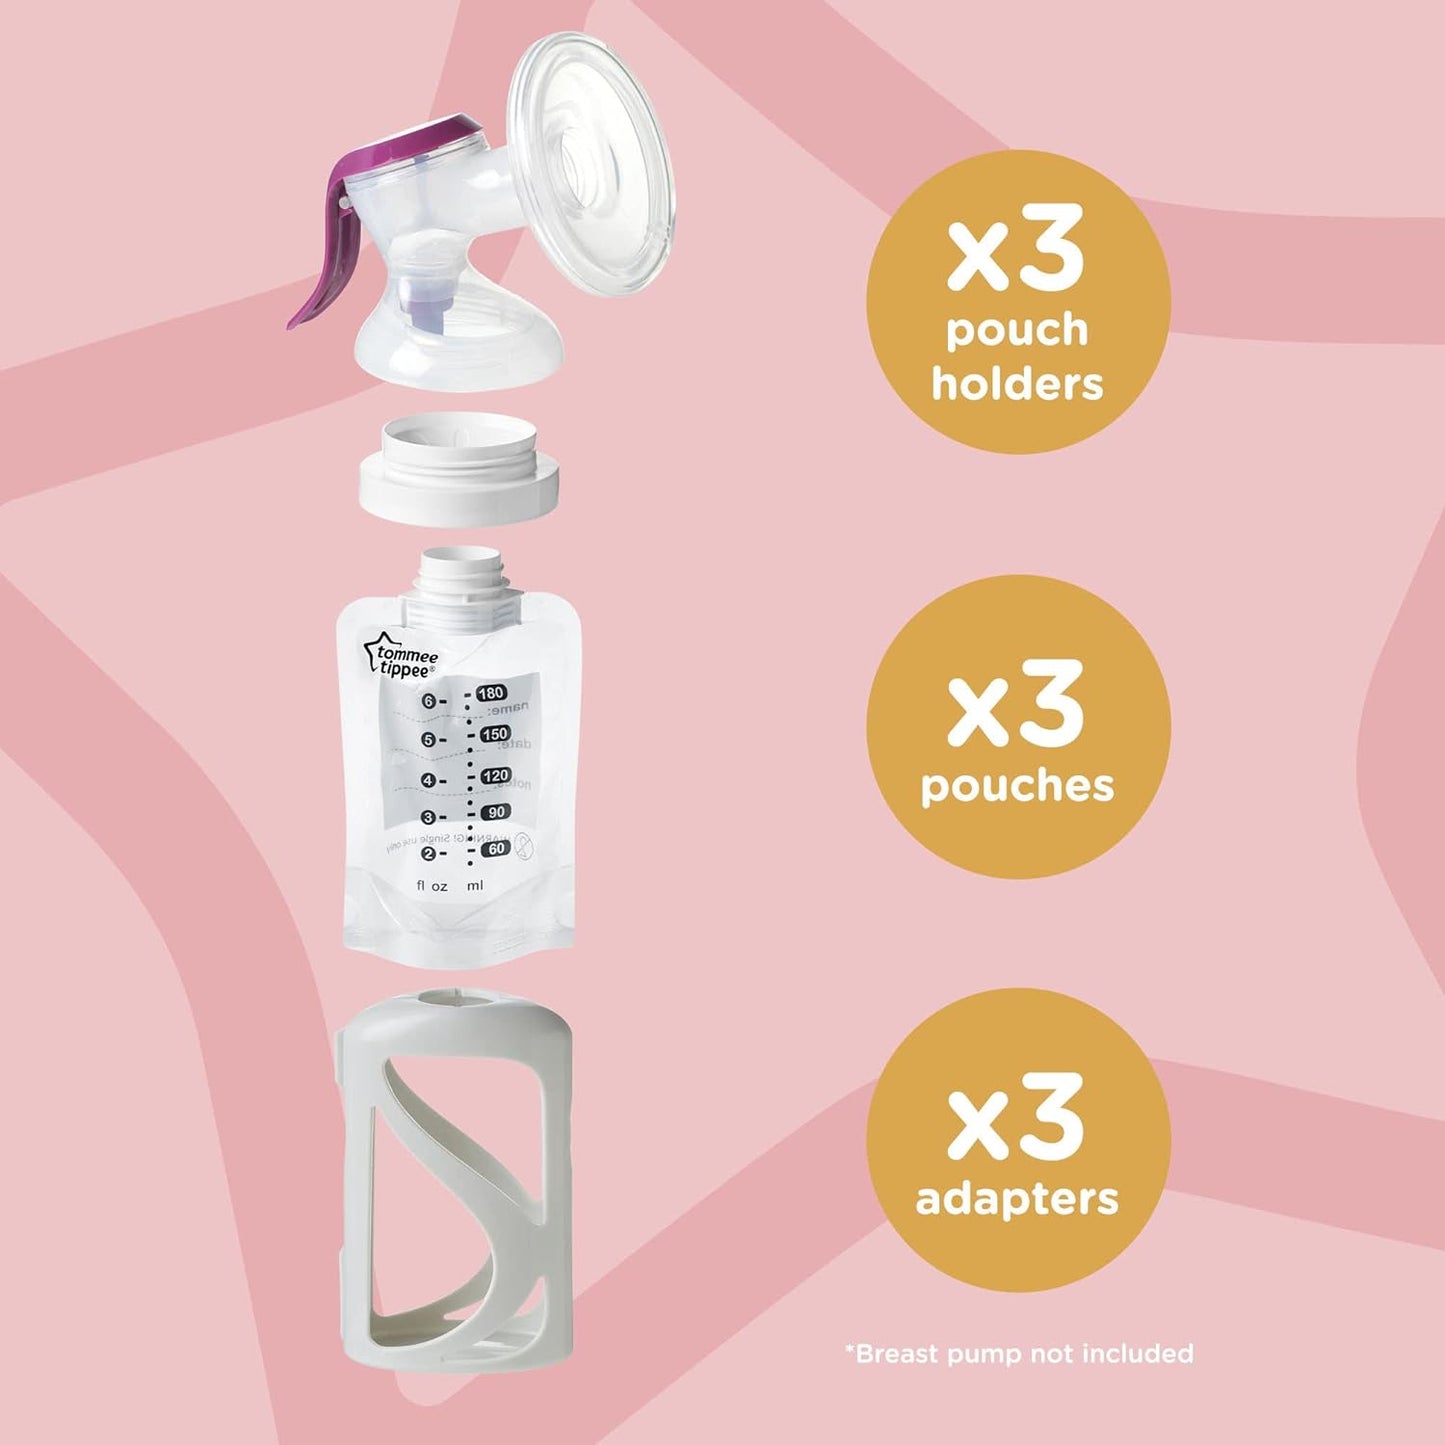 Tommee Tippee Breast Milk Starter Set, Compatible With All Leading Breast Pumps